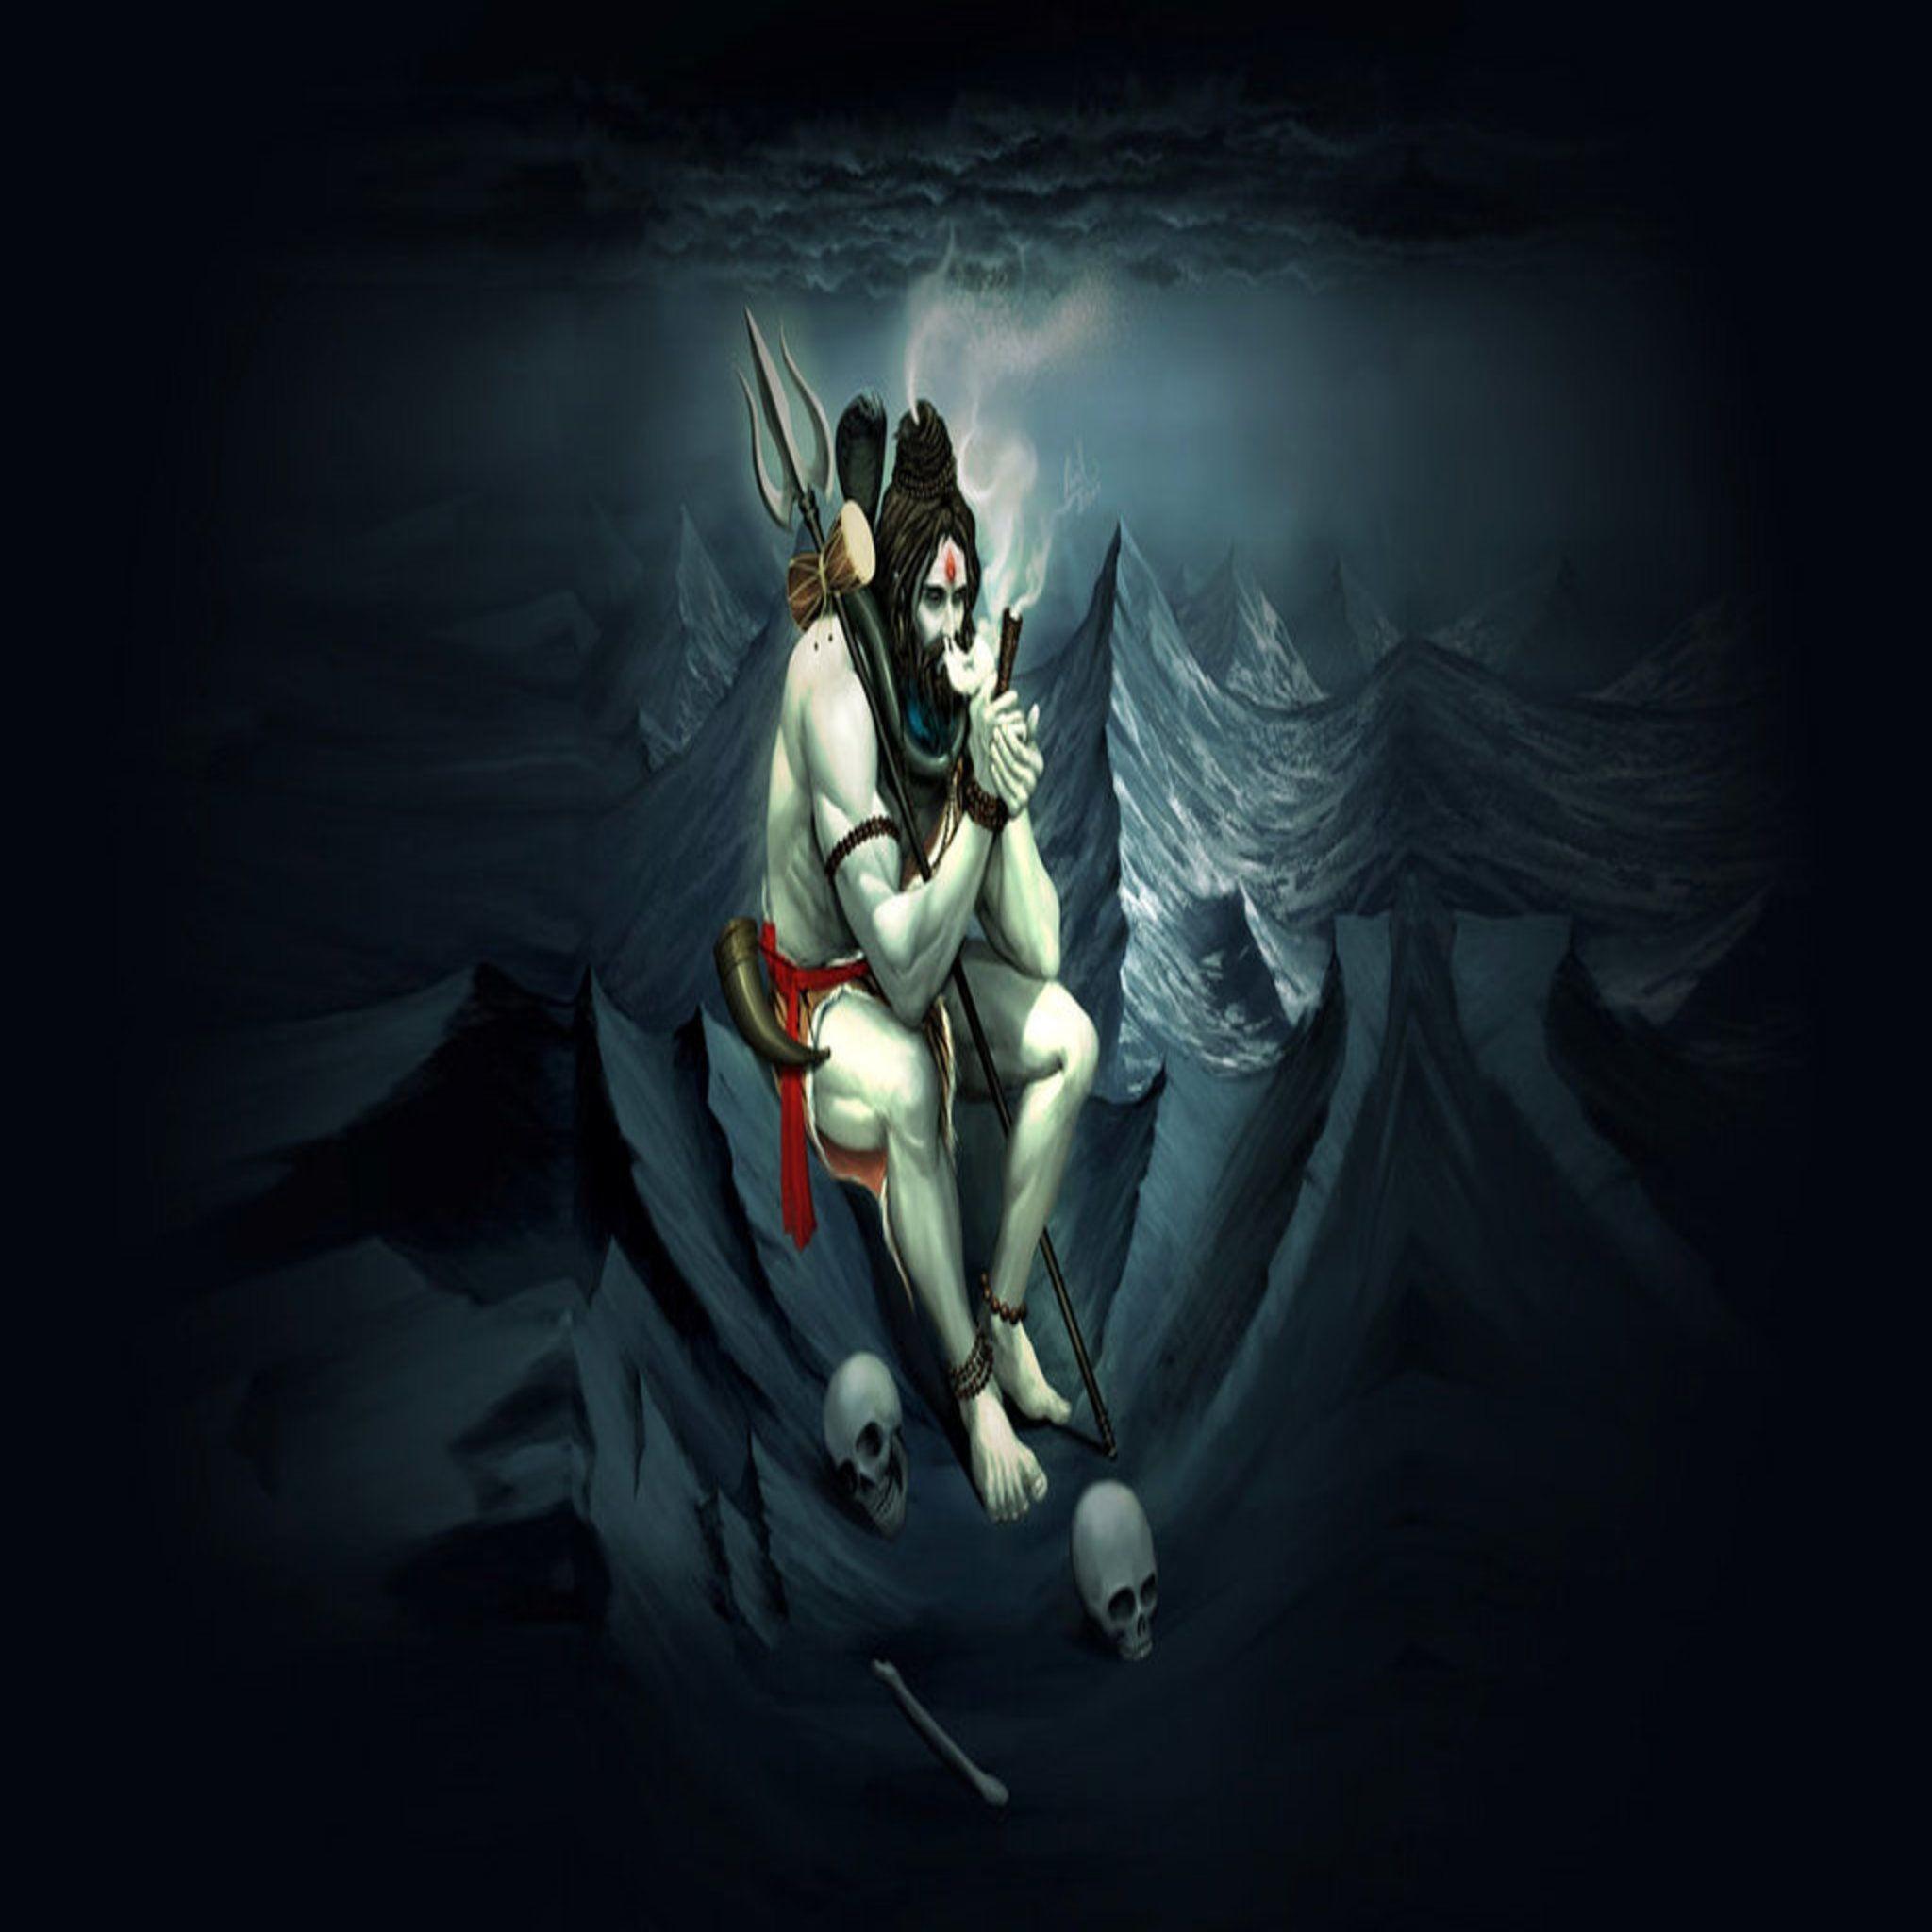 Lord Shiva Wallpapers HD 71 images